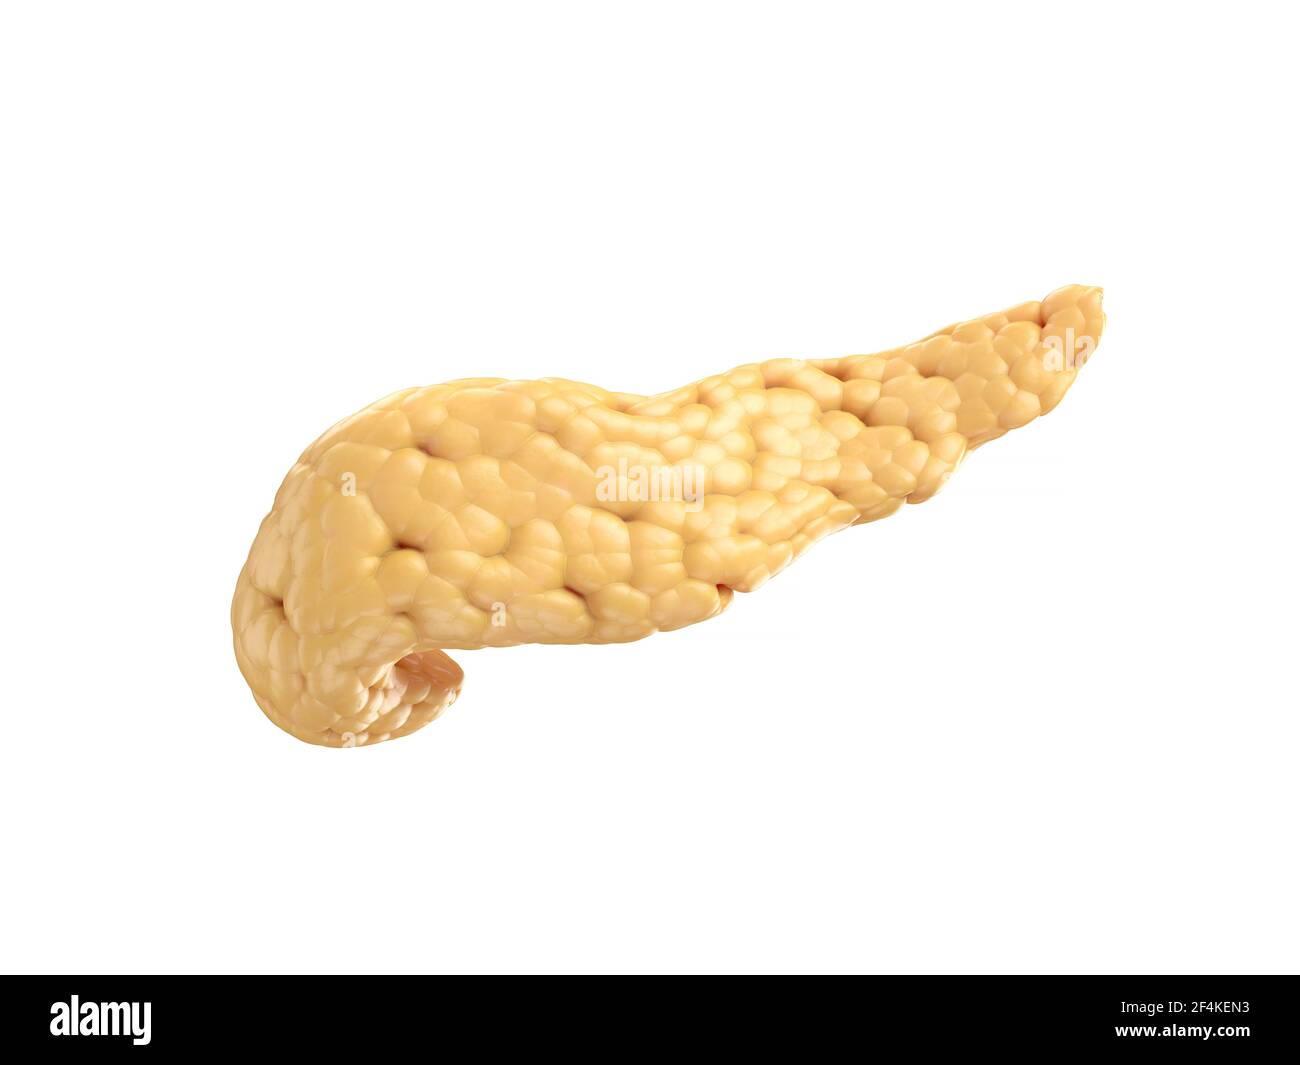 Anatomically accurate illustration of human pancreas isolated on white. 3d rendering Stock Photo